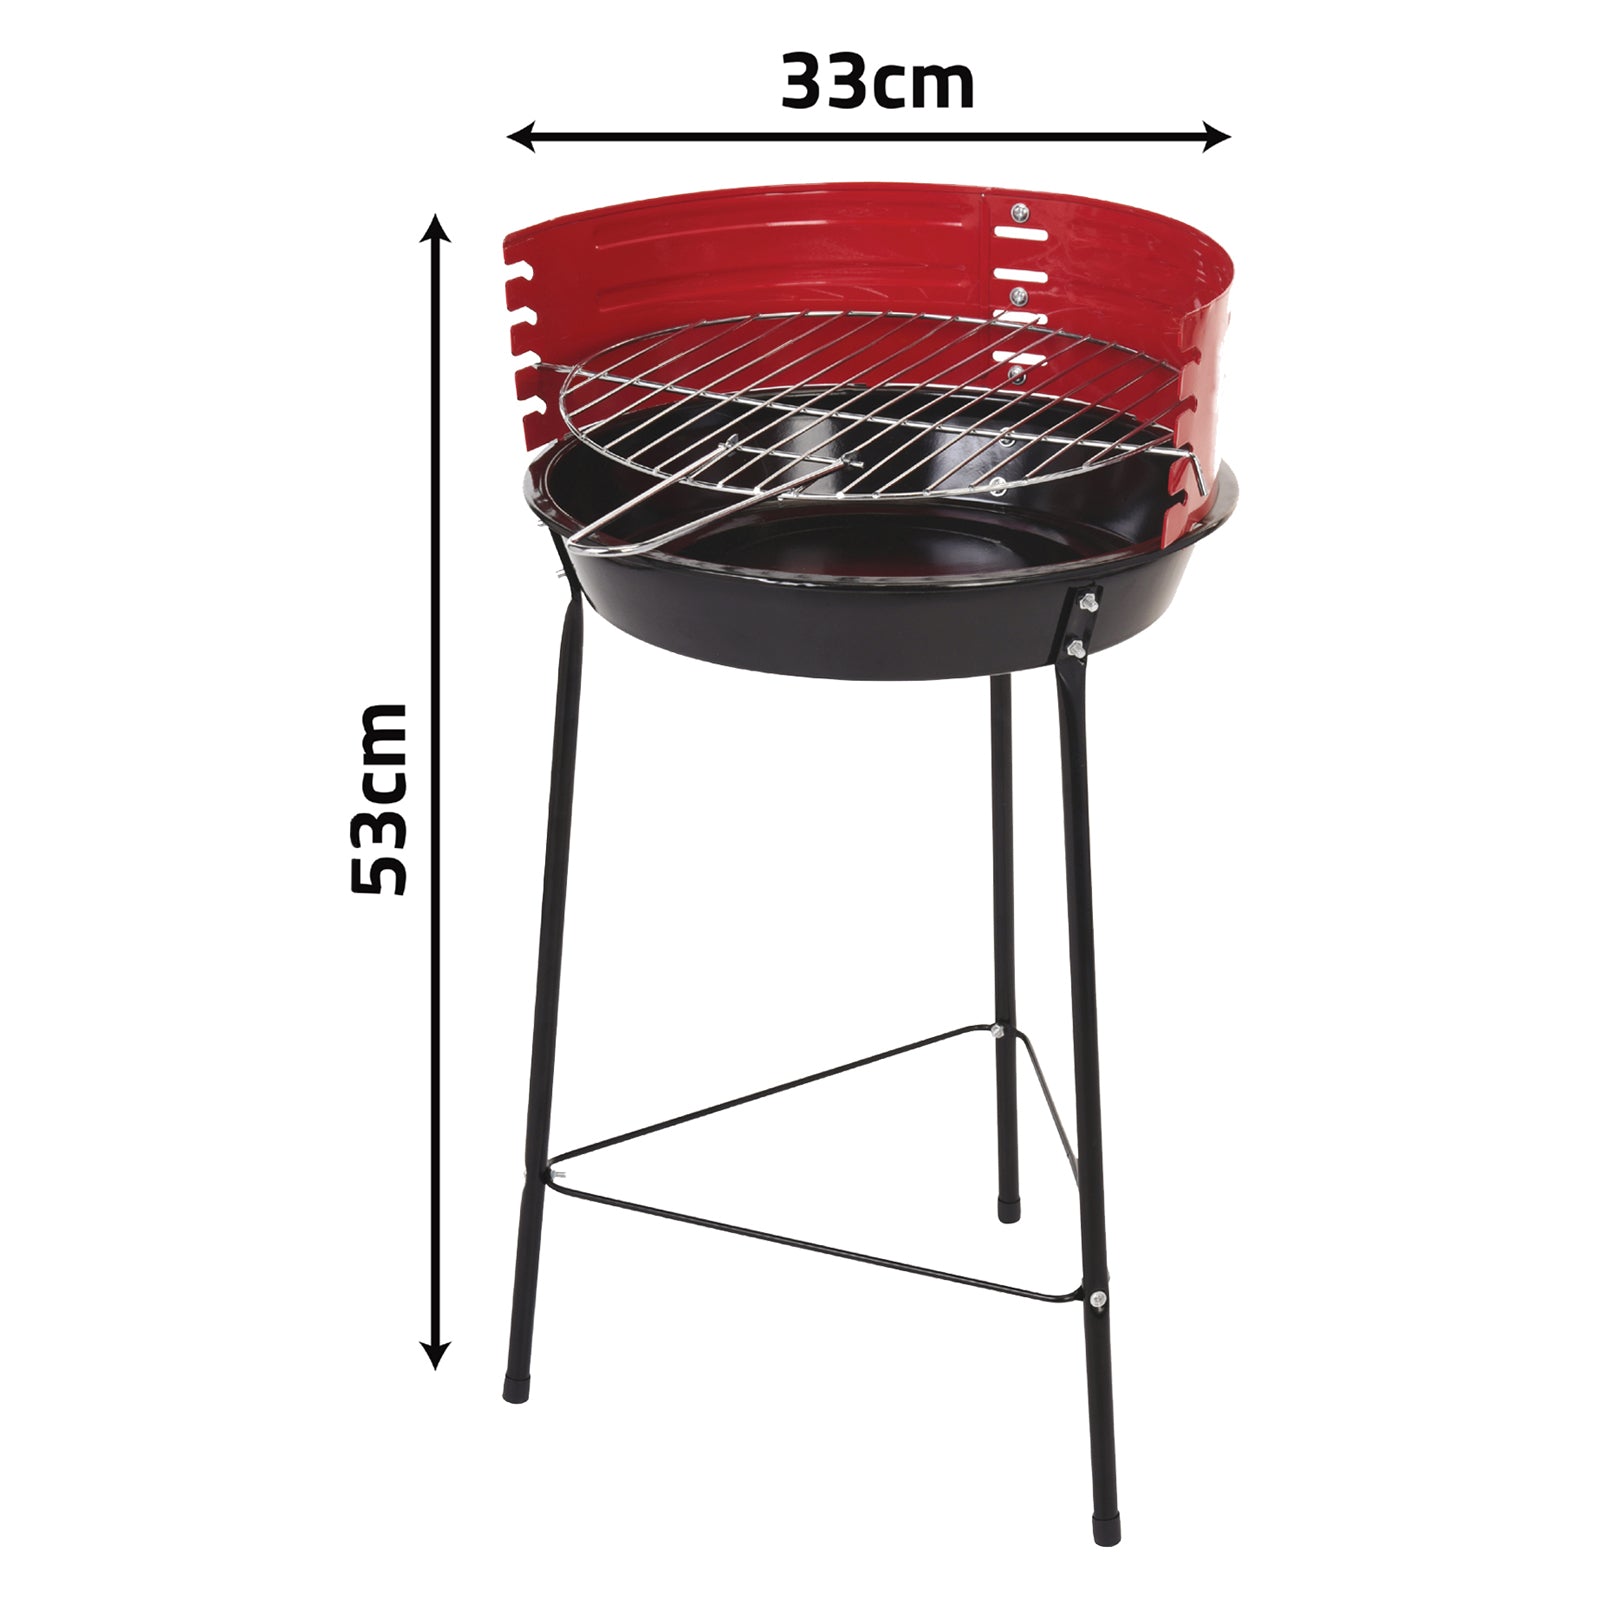 AMOS 14" Open Top BBQ Grill